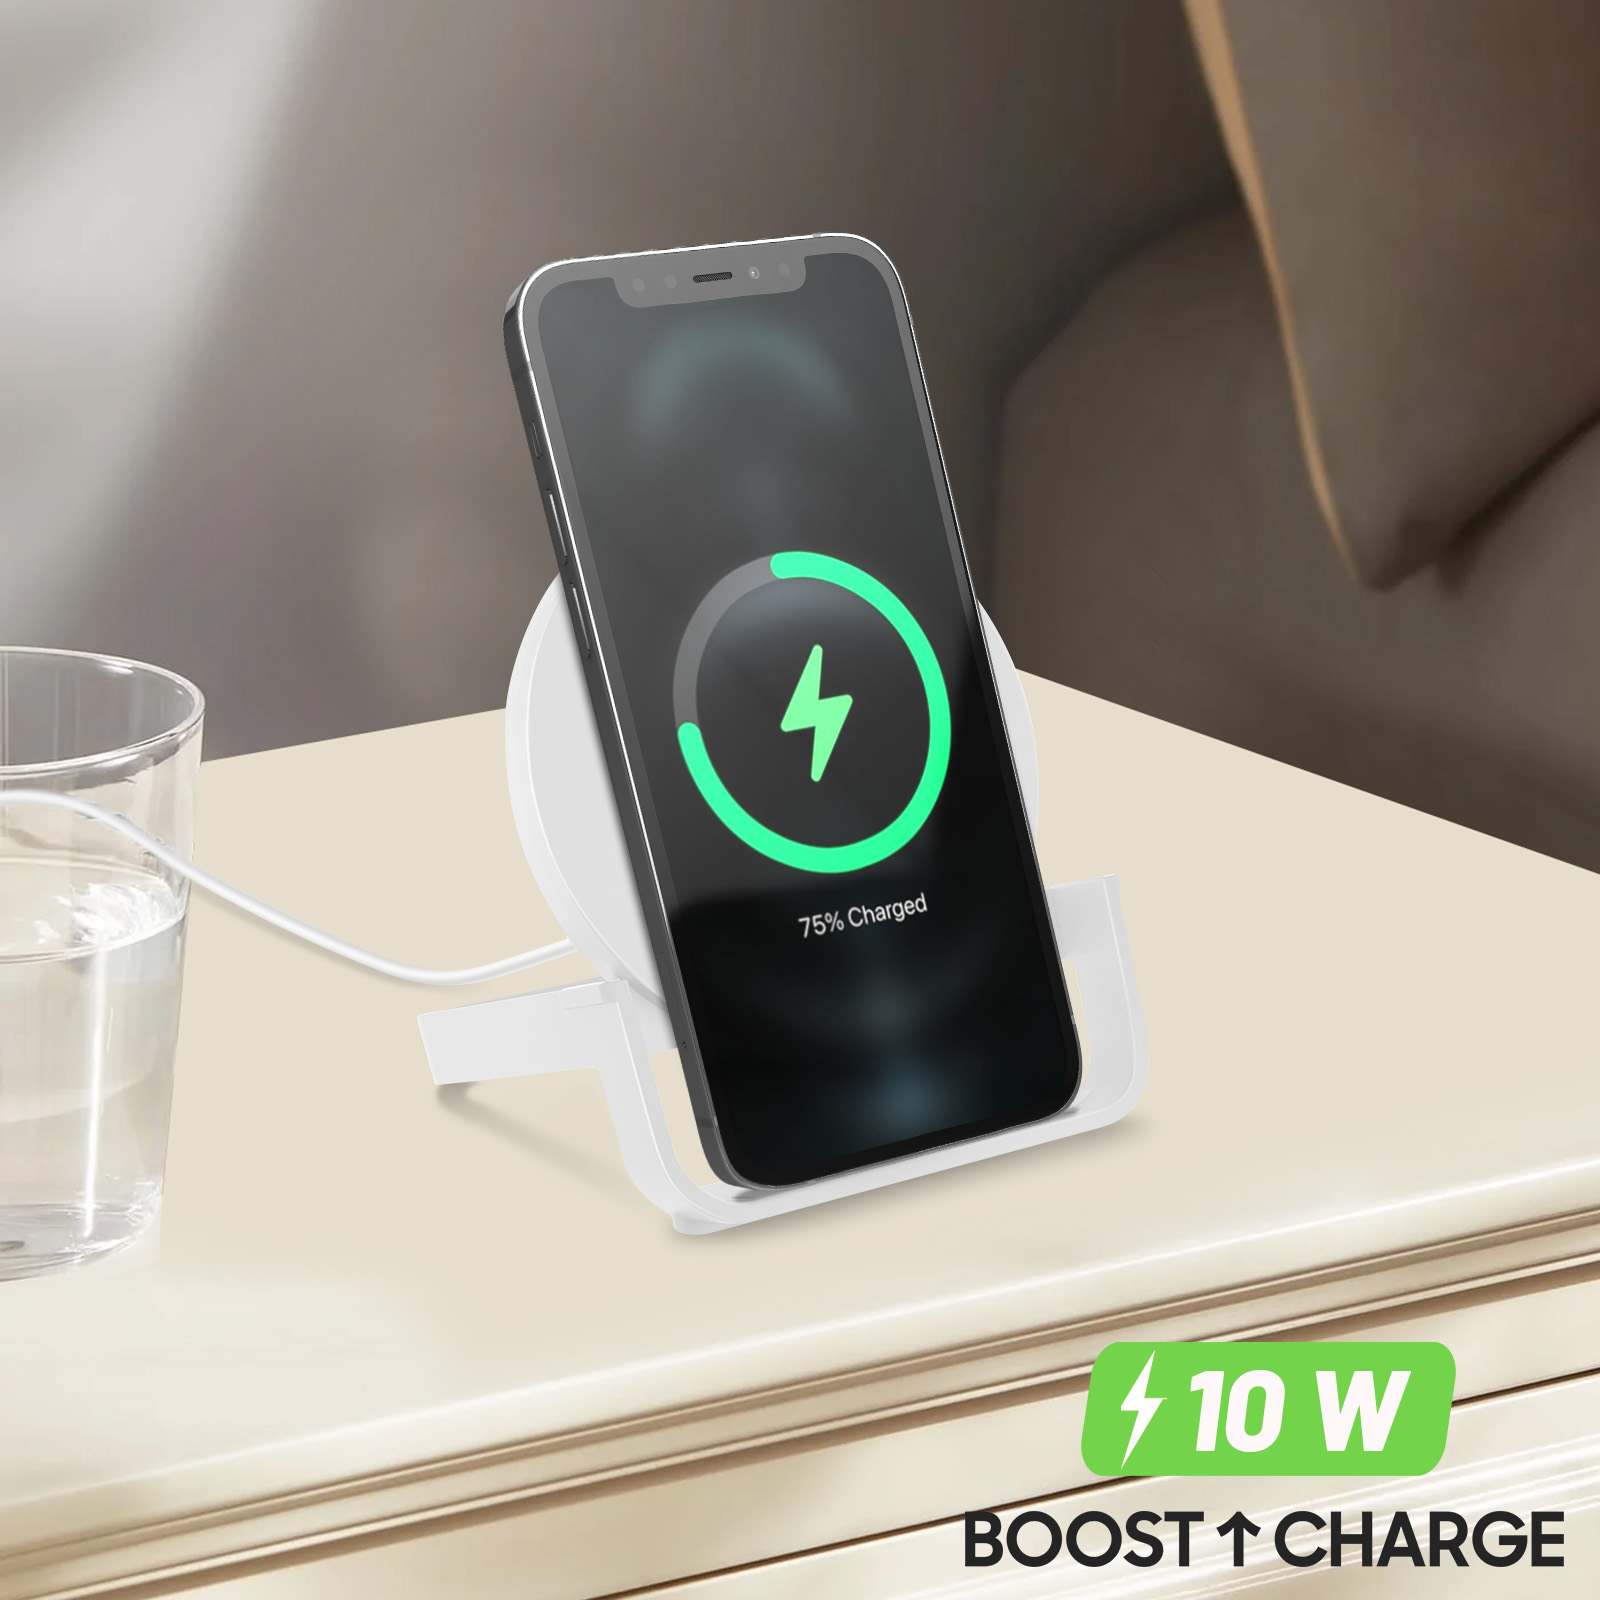 Chargeur sans fil Android iOS Blanc Charge rapide induction